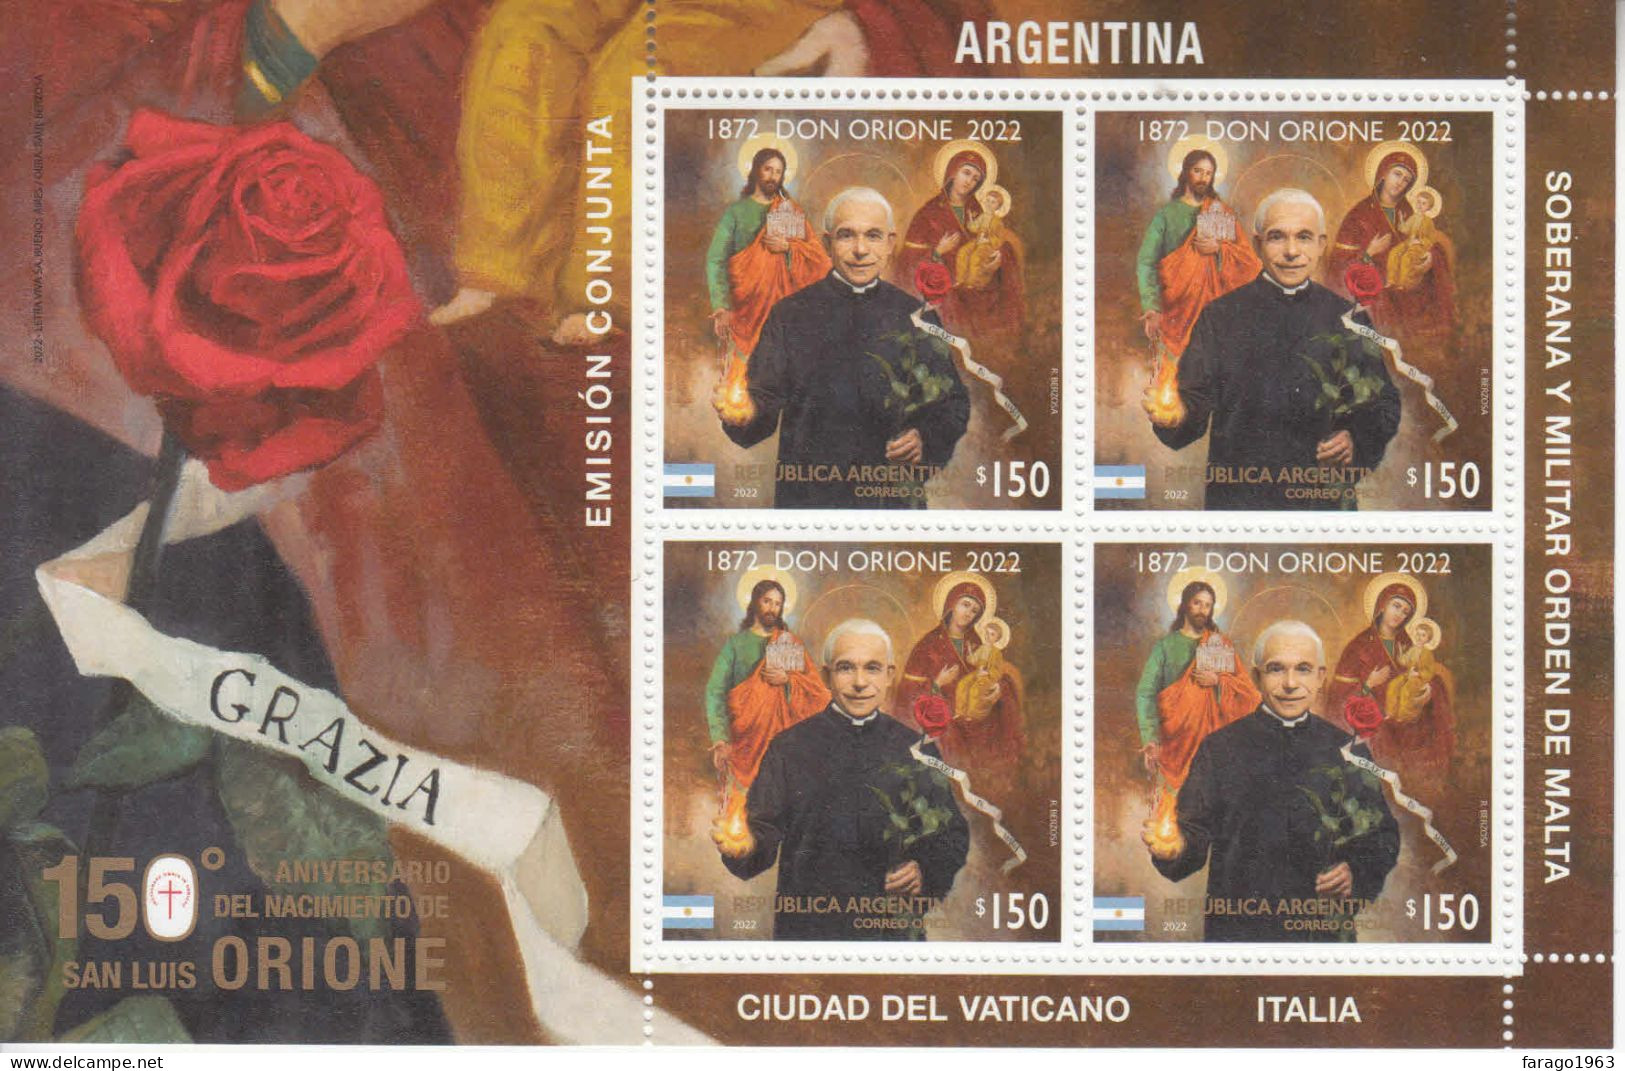 2022 Argentina Don Orione JOINT ISSUE Vatican Souvenir Sheet MNH - Unused Stamps